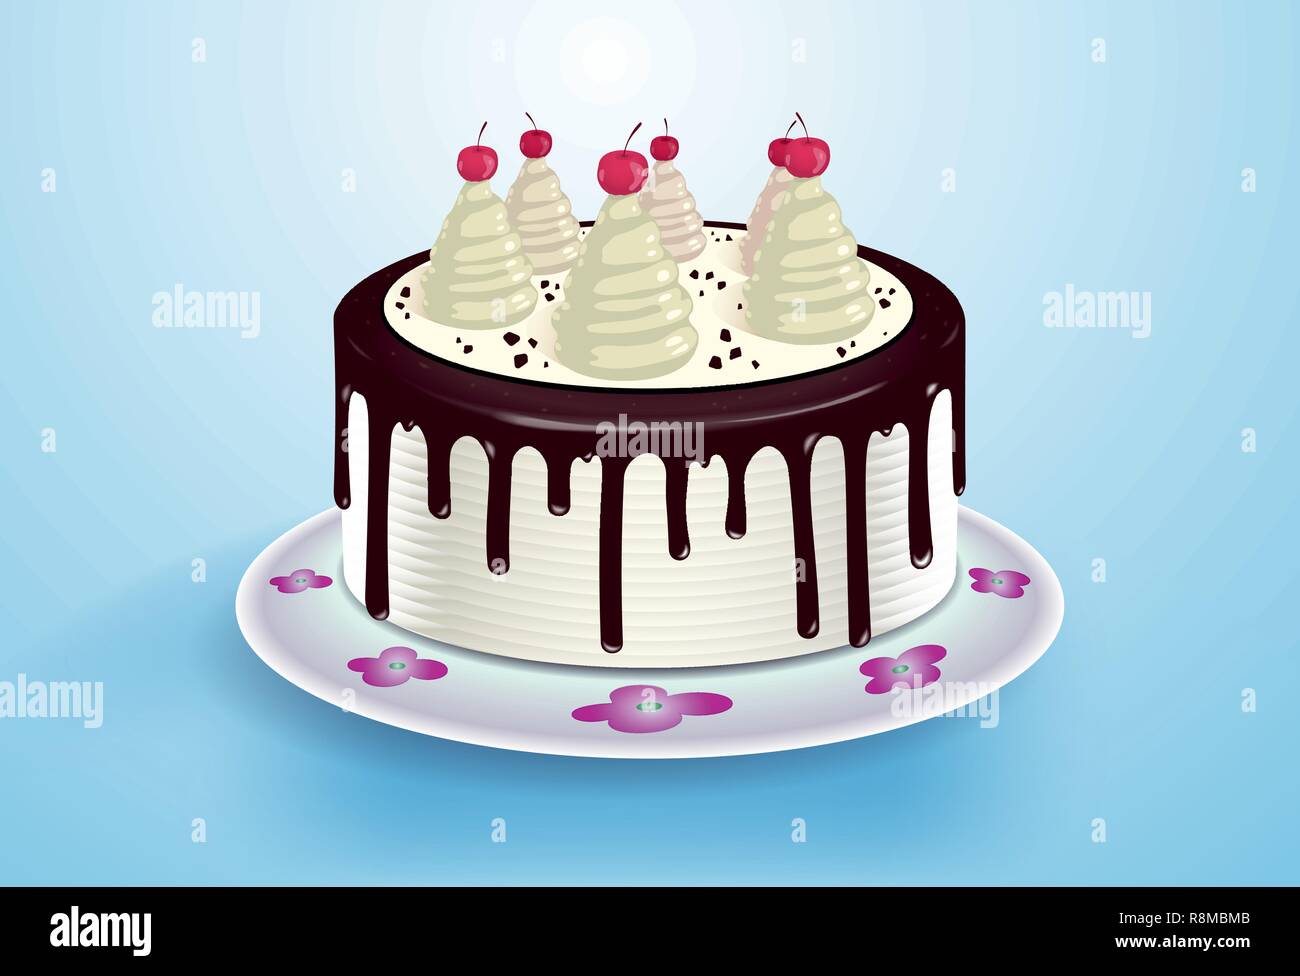 Cake with cream, cocktail cherry and chocolate topping on the plate with flower pattern Stock Vector